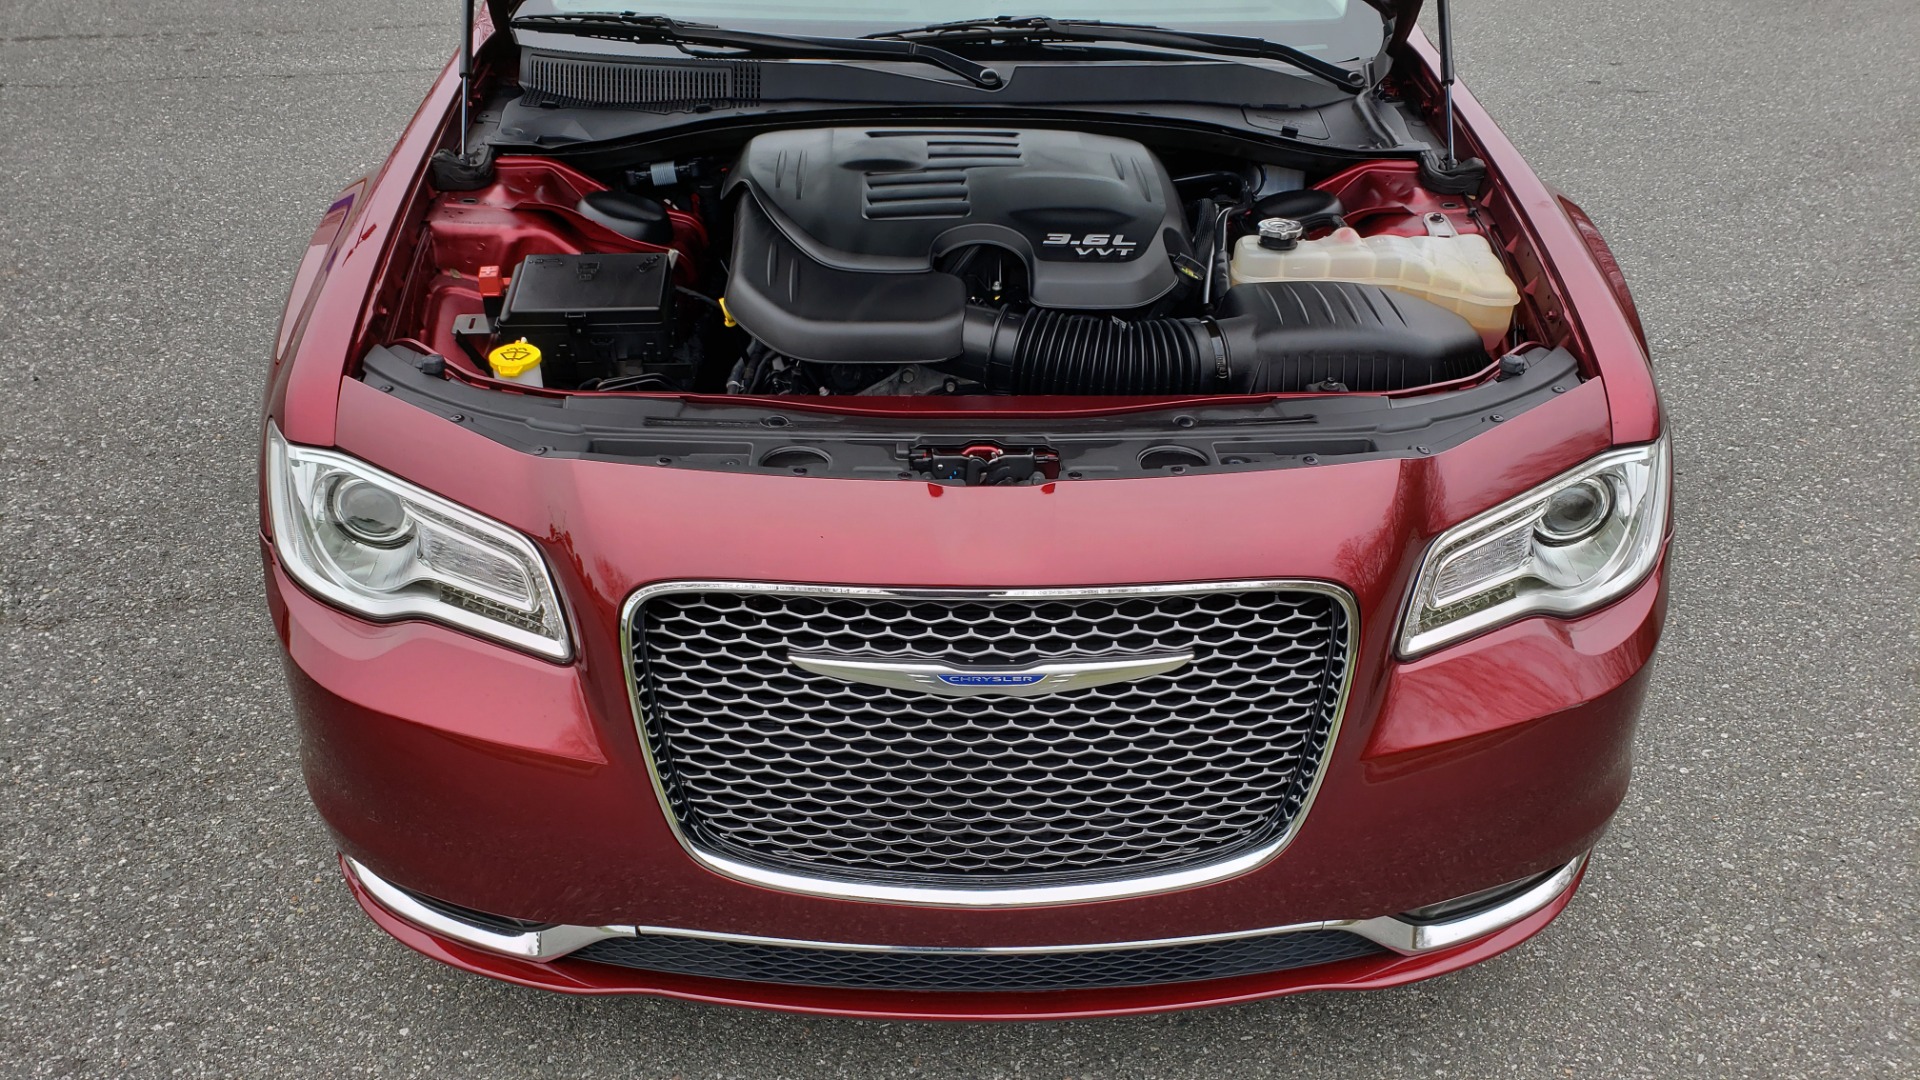 Used 2019 Chrysler 300 LIMITED / 3.6L V6 / 8-SPD AUTO / LEATHER / REARVIEW for sale Sold at Formula Imports in Charlotte NC 28227 16